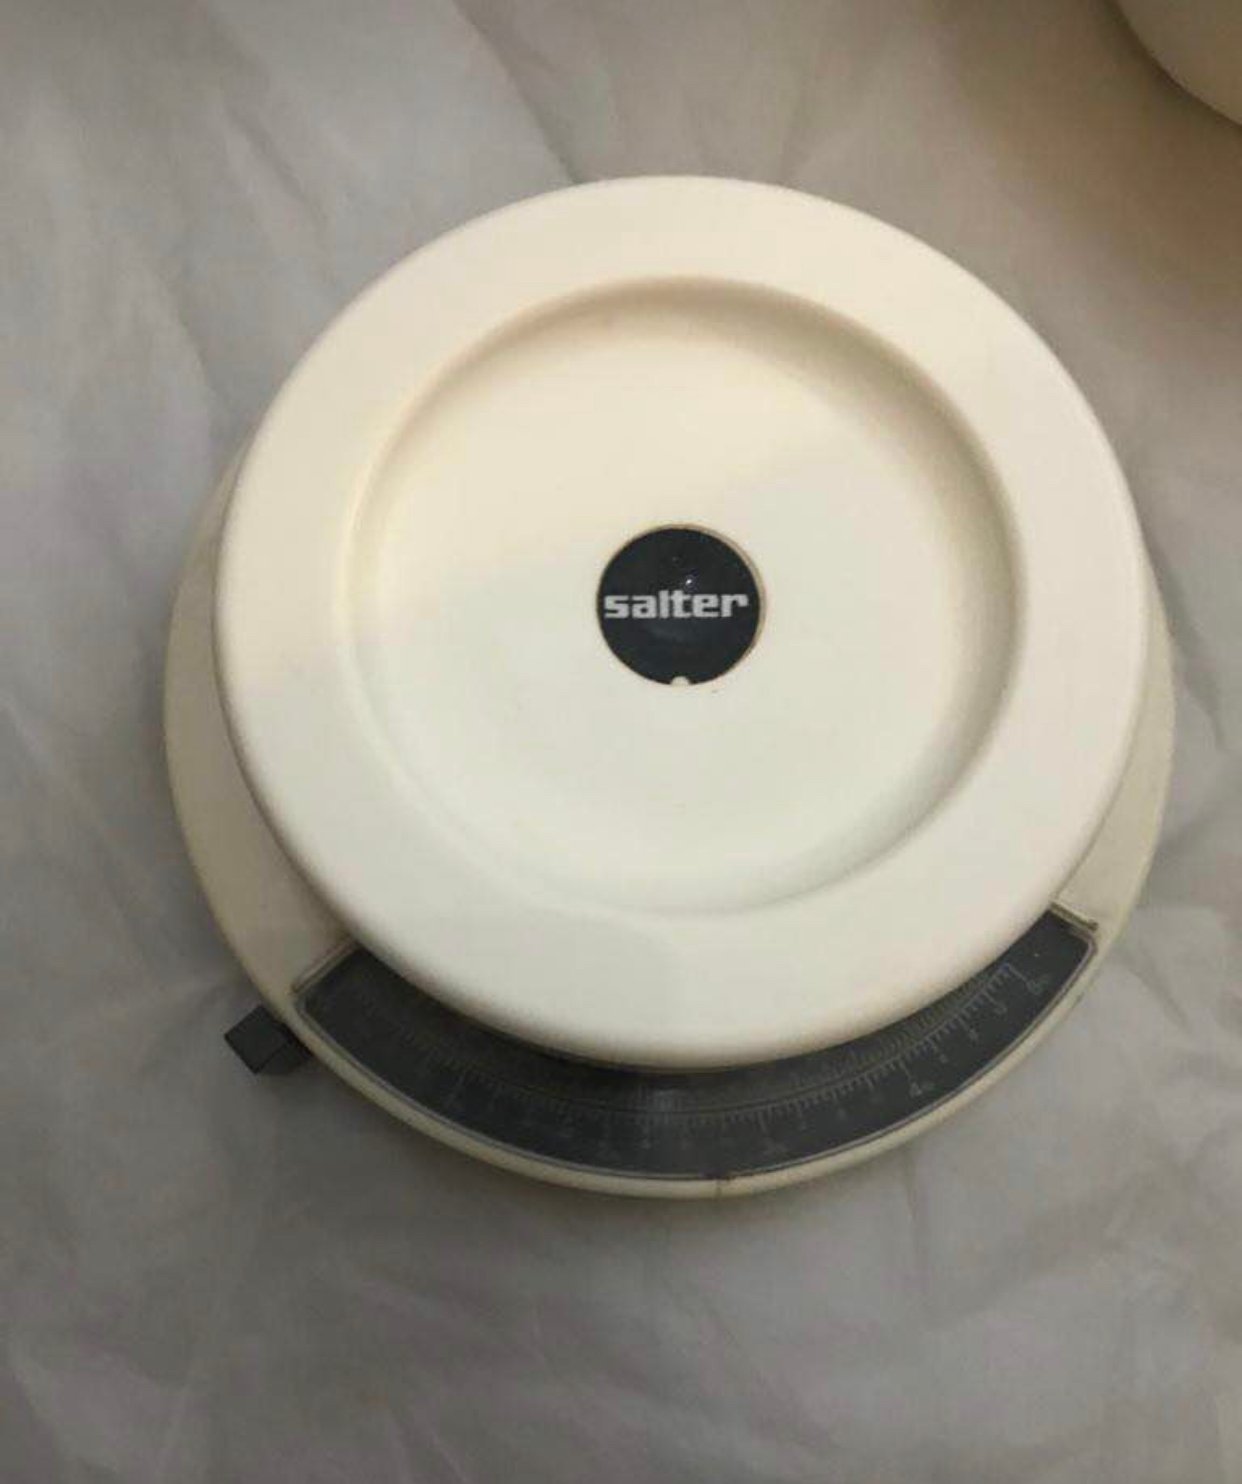 Vintage salter kitchen weighing scales with bowl